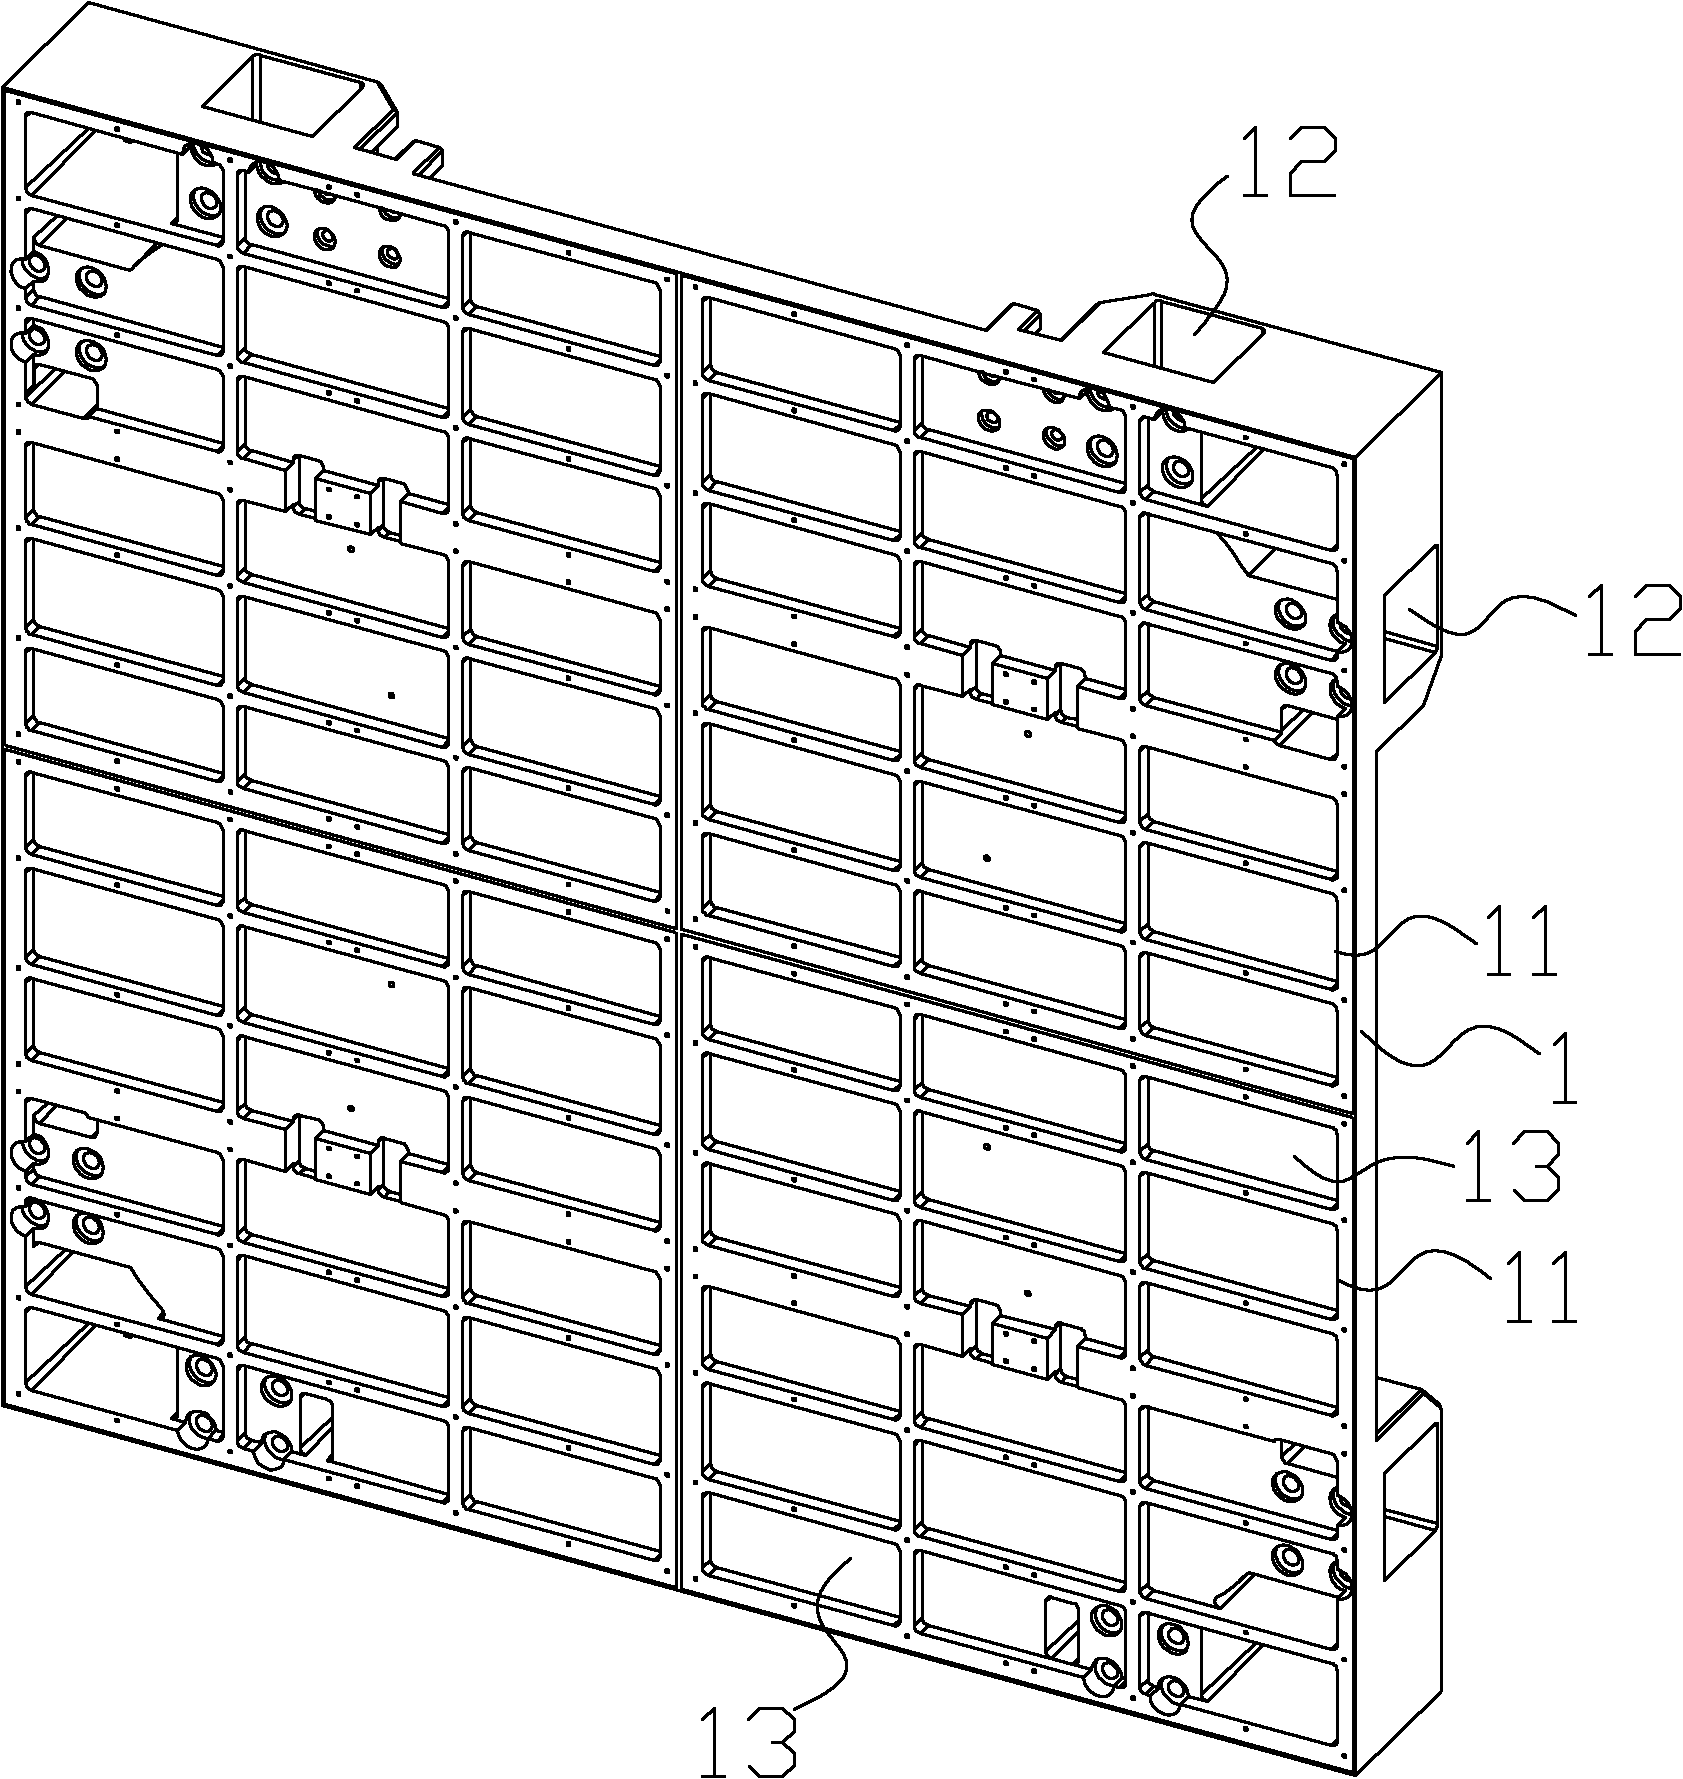 Structure of box body of light emitting diode (LED) display screen